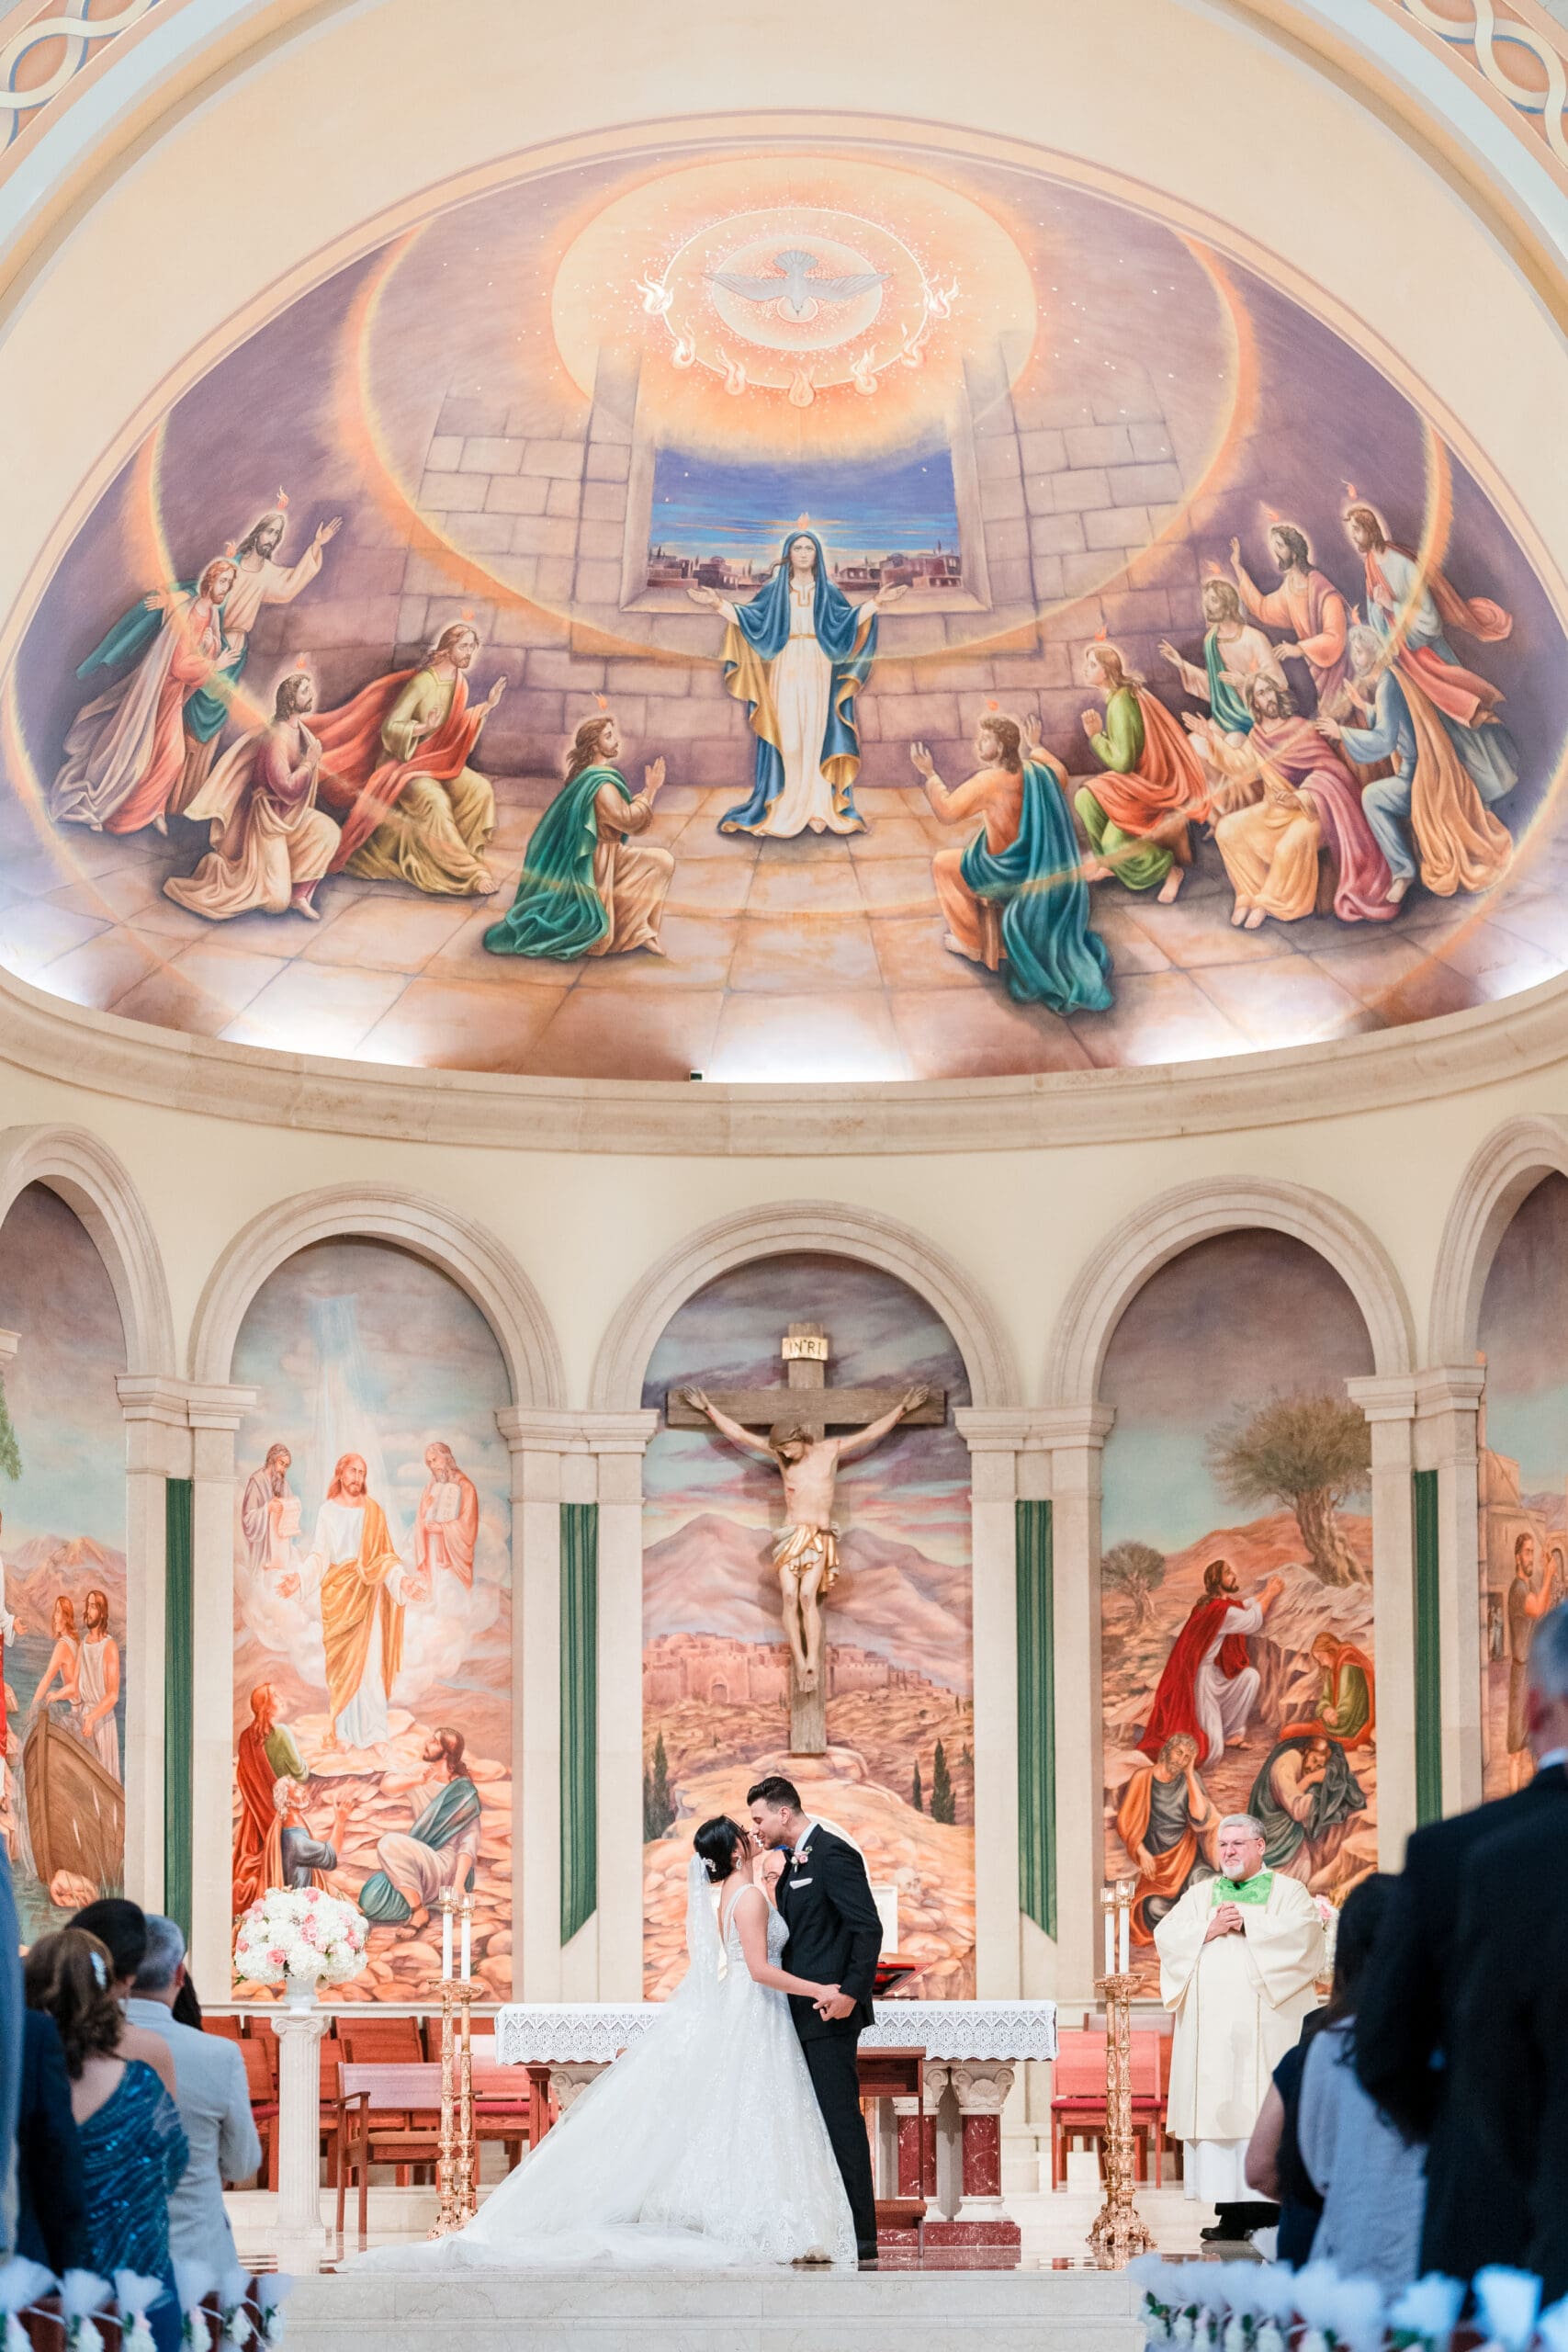 Tall shot capturing the 'I do' kiss at the altar of St. James Cathedral, with the stunning artwork in the dome above the altar.